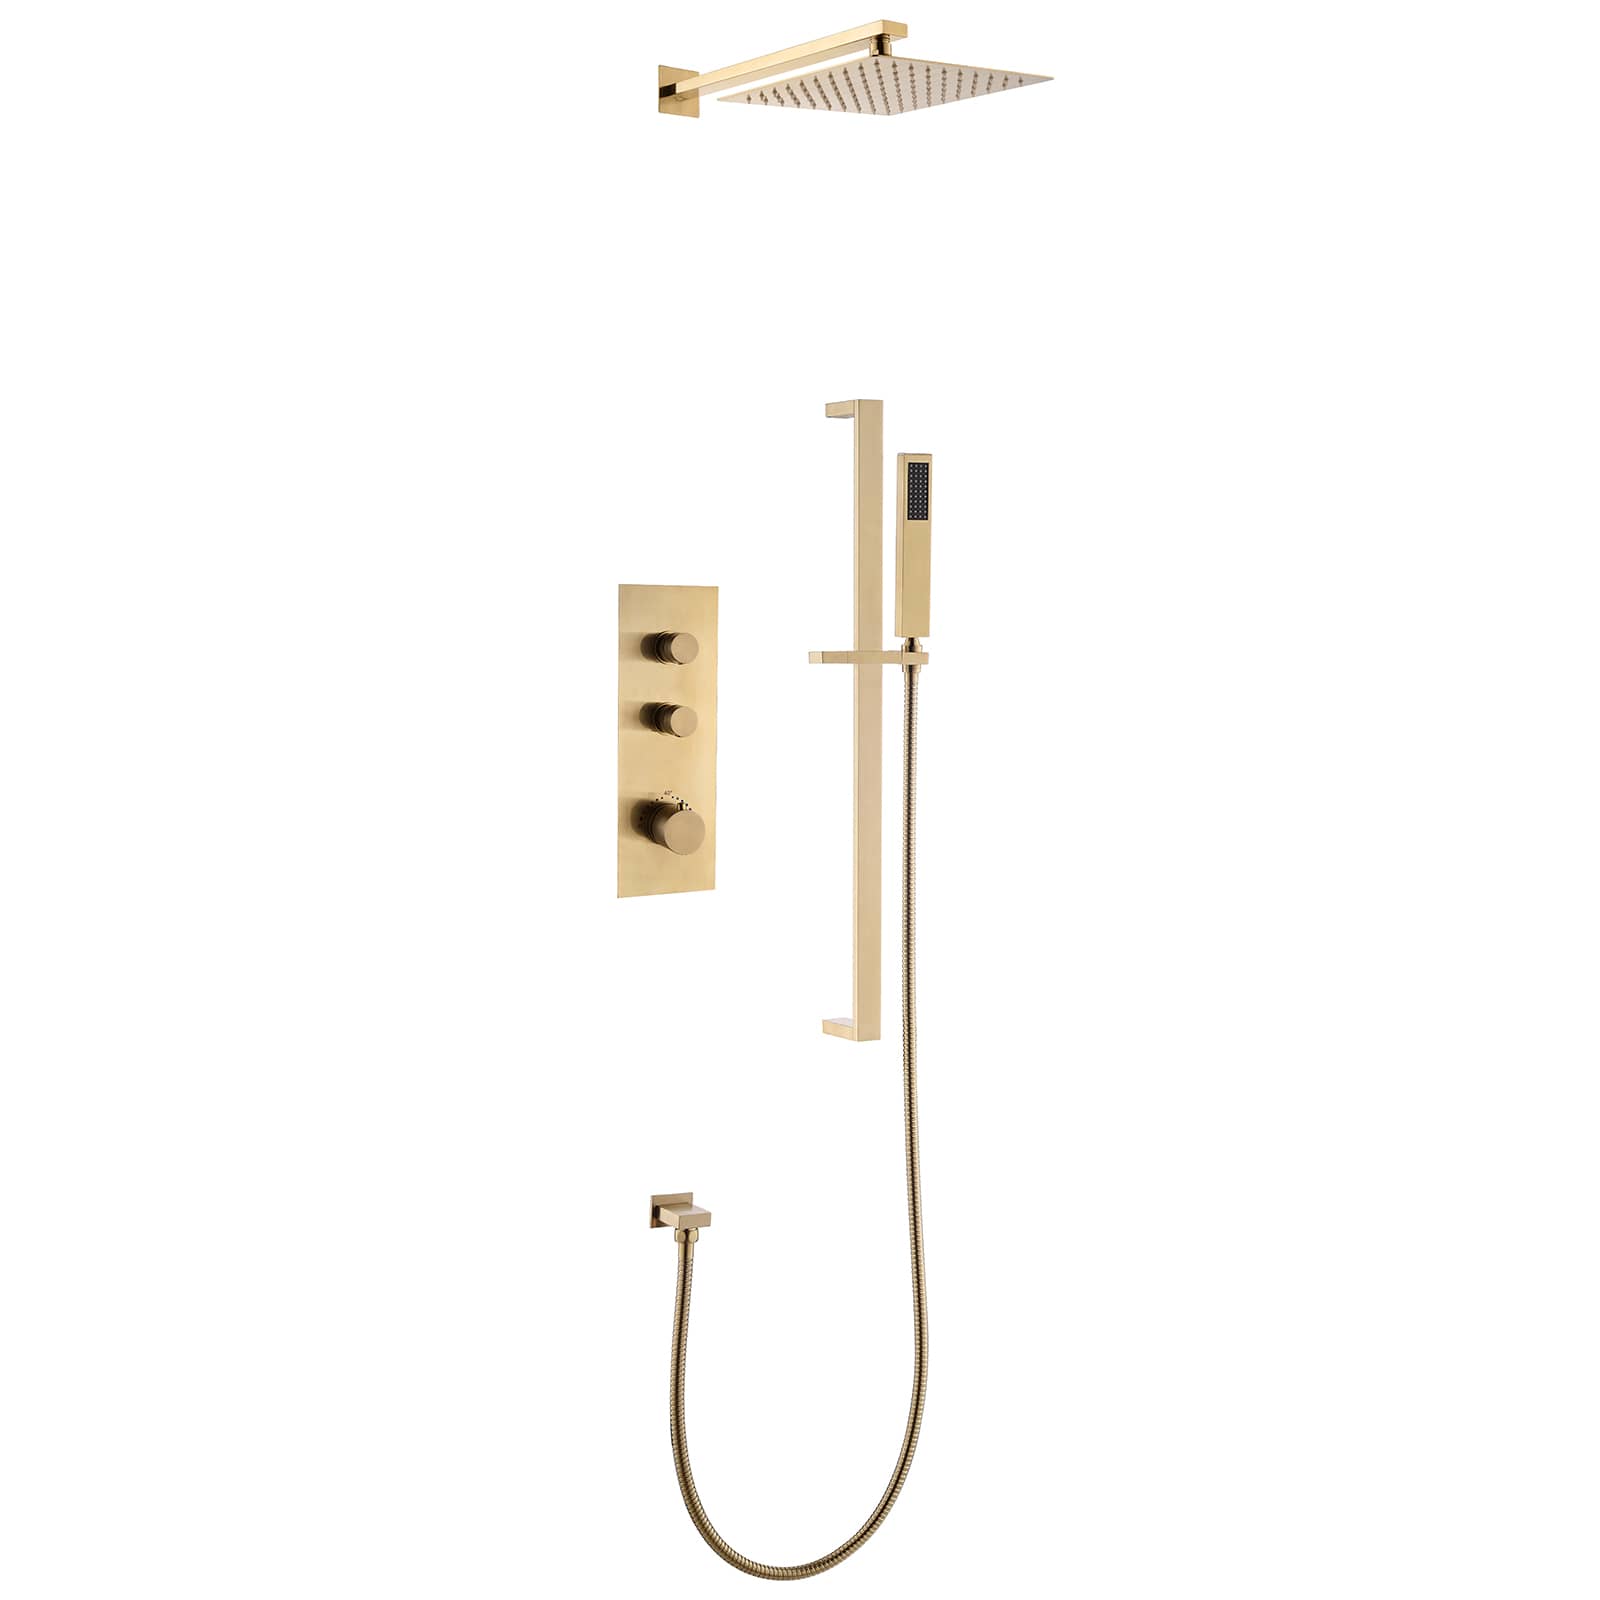 CASAINC Brushed Gold 7.6-l/min 1-Handle Wall Mount Shower Faucet with Valve Included